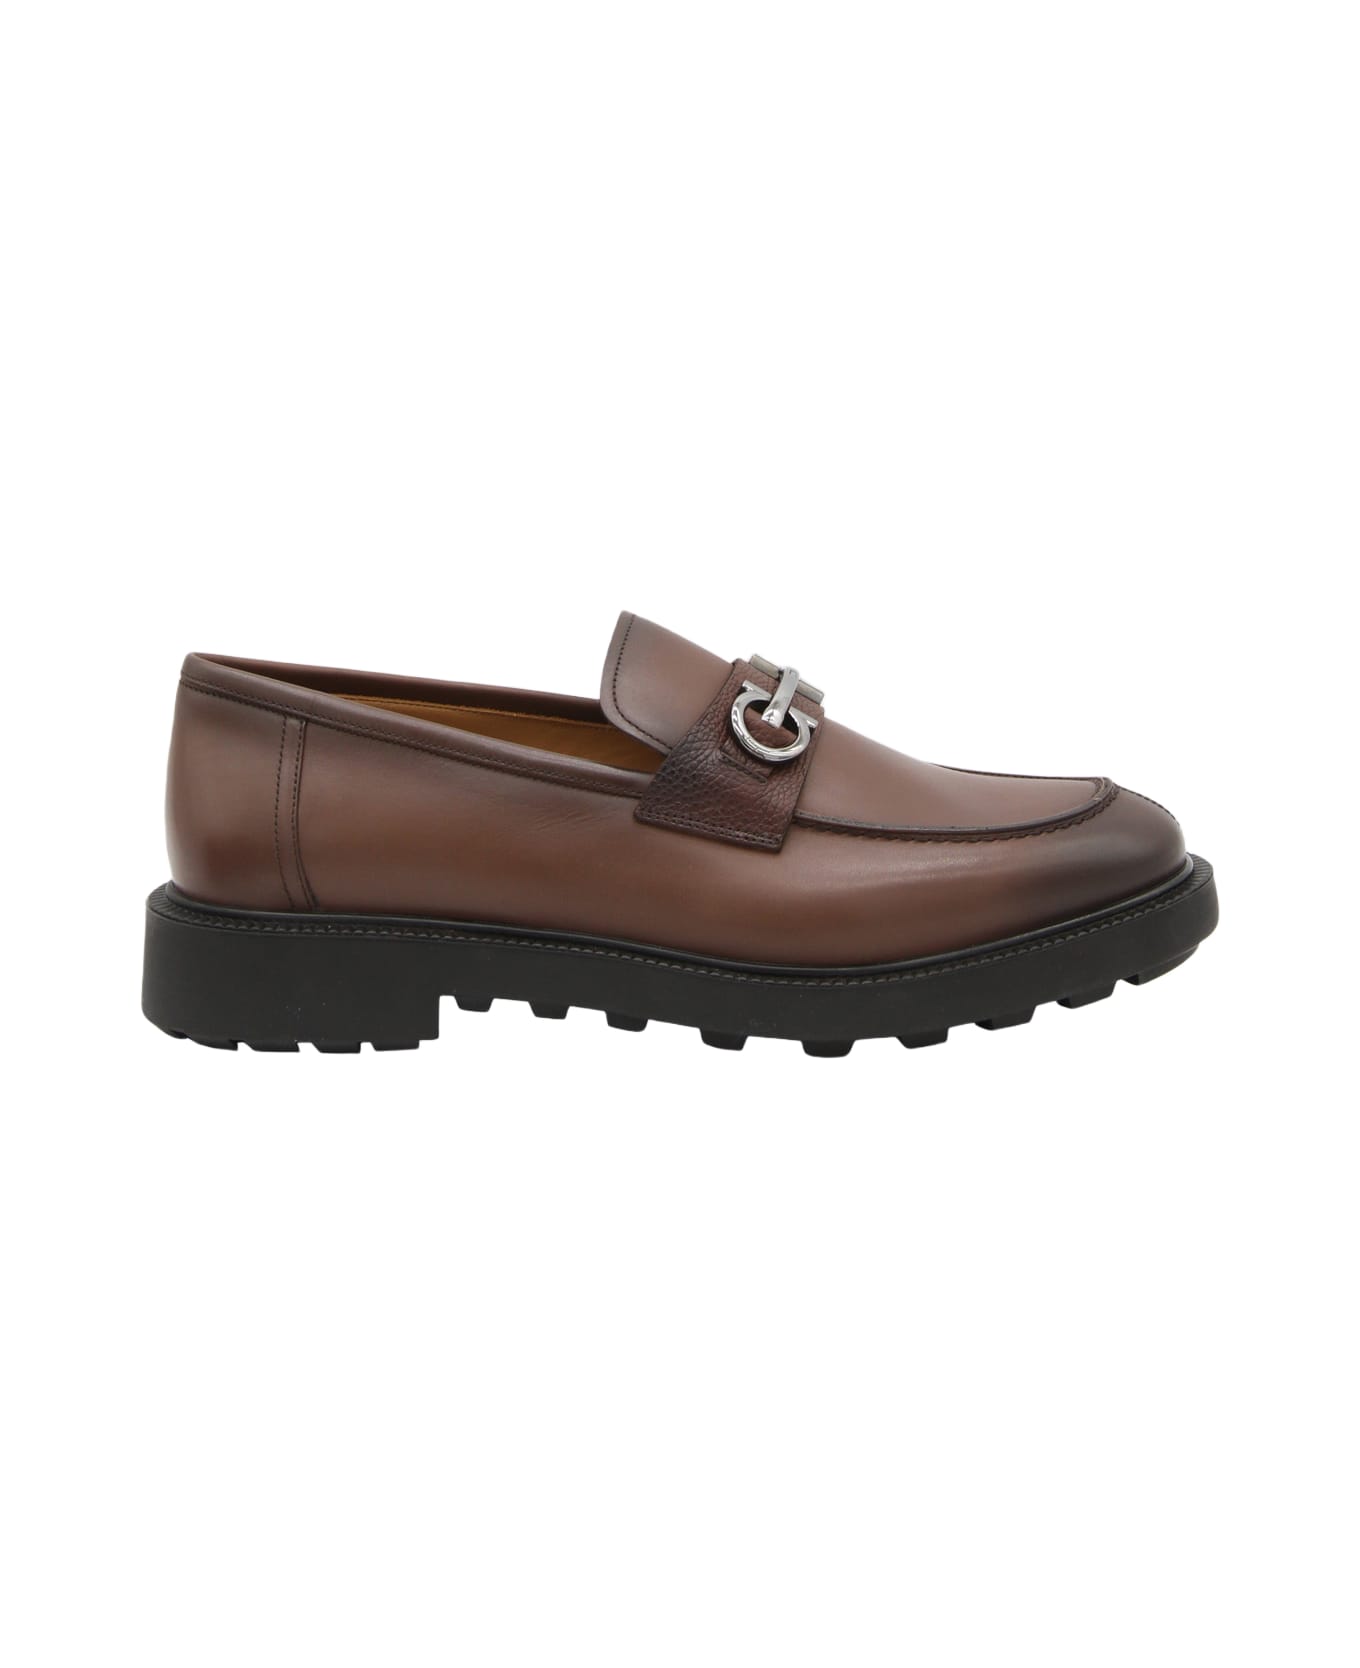 Ferragamo Brown Leather Loafers - Brown ローファー＆デッキシューズ